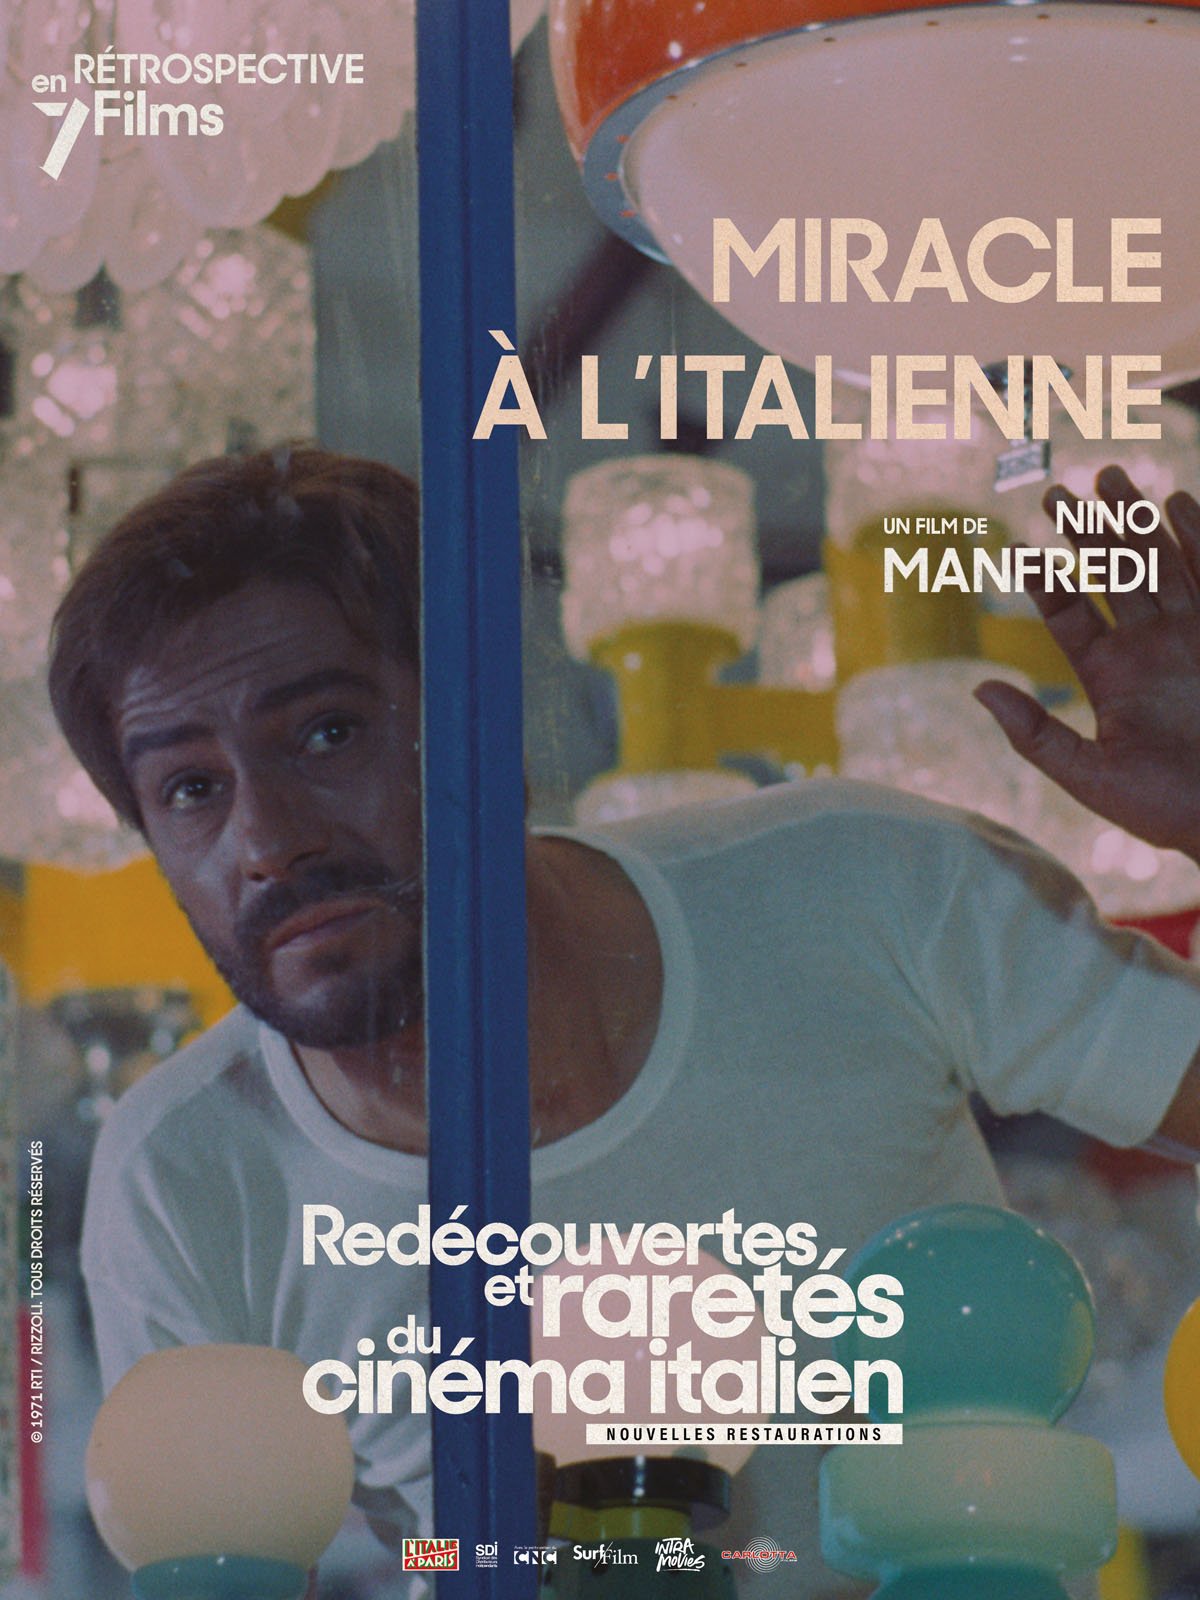 MIRACLE A L ITALIENNE